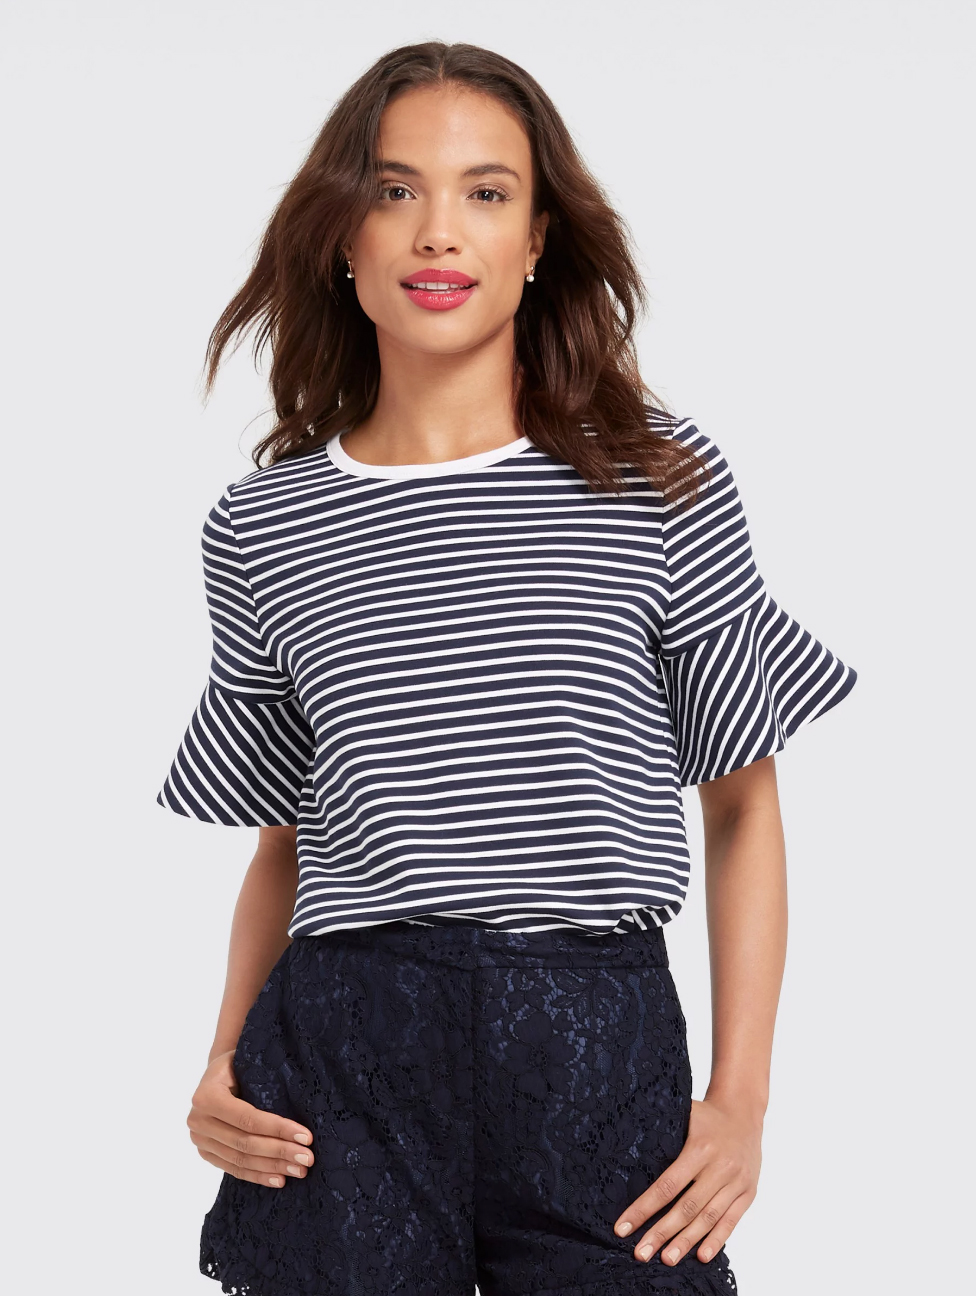 (Brand new with Tags) Draper James Sailor Stripe Ponte Tee, Size Small